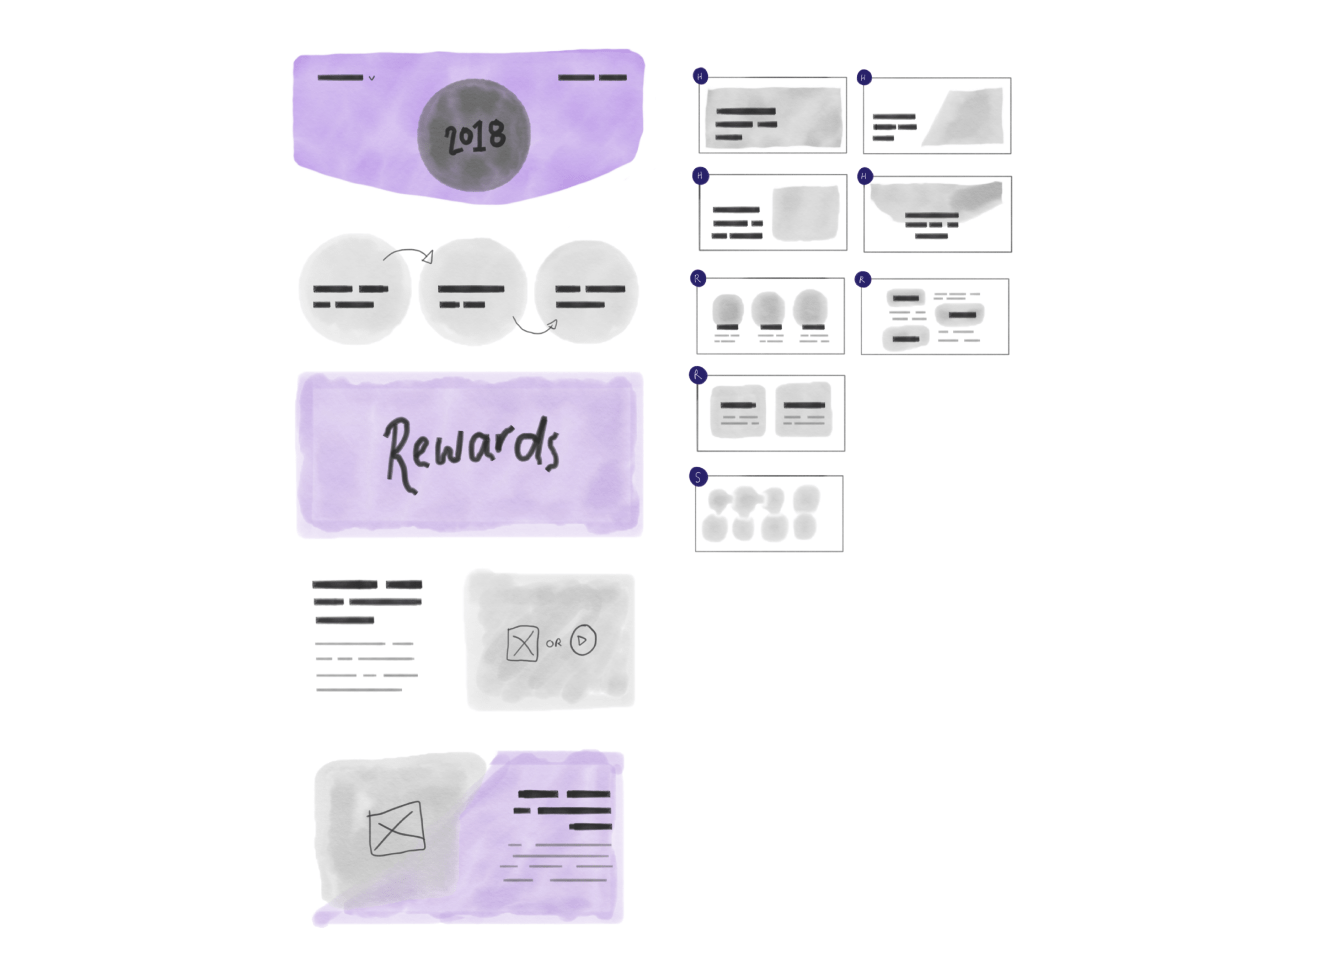 Drafts - Landing pages